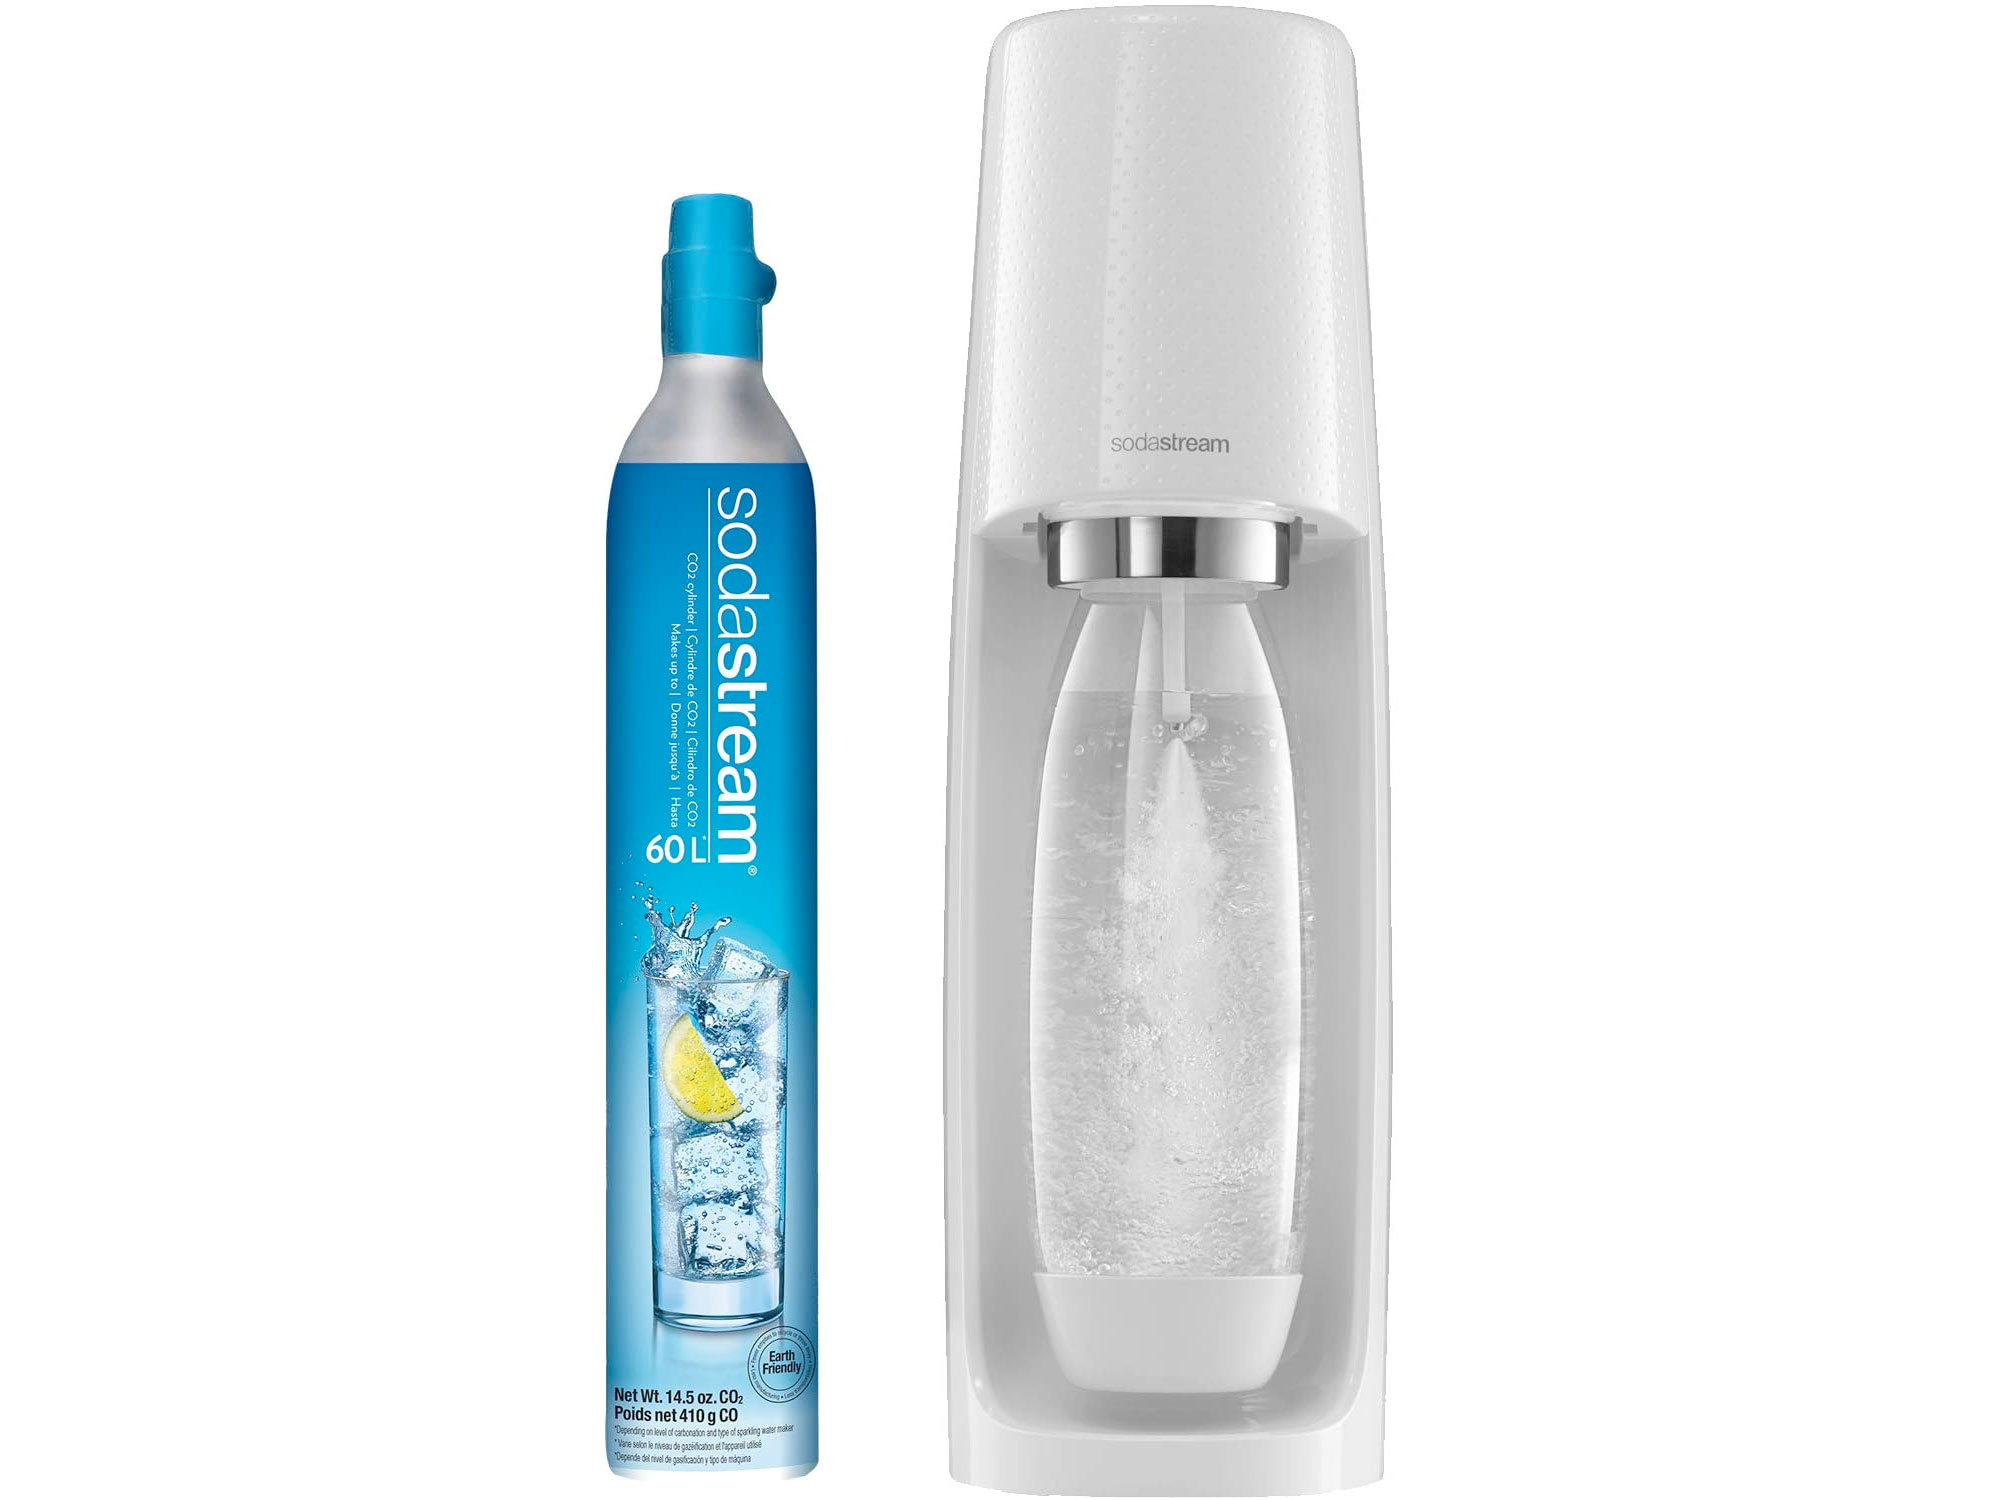 Amazon：SodaStream – Fizzi (Sparkling Water Maker) with 60L Cylinder and 1L Bottle只賣$99.99